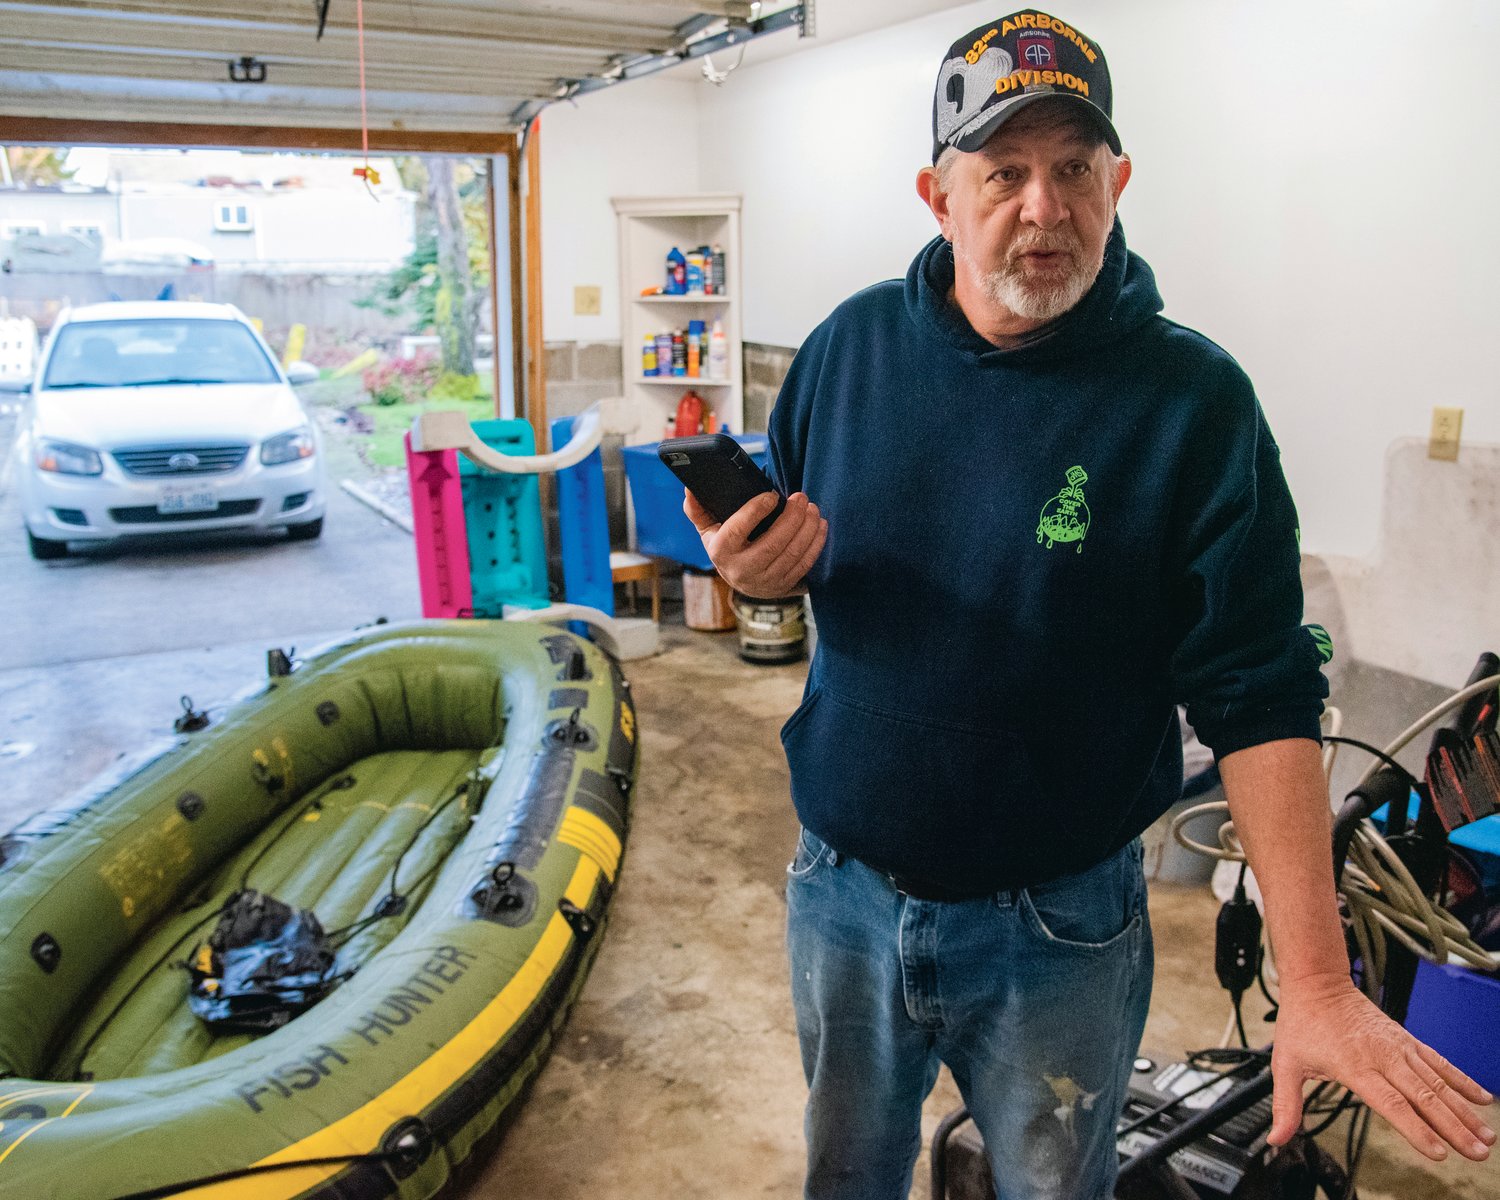 James Miller talks about his decision to blow up an inflatable raft as water from China Creek rose into the 500 block of Hemlock Street in Centralia.